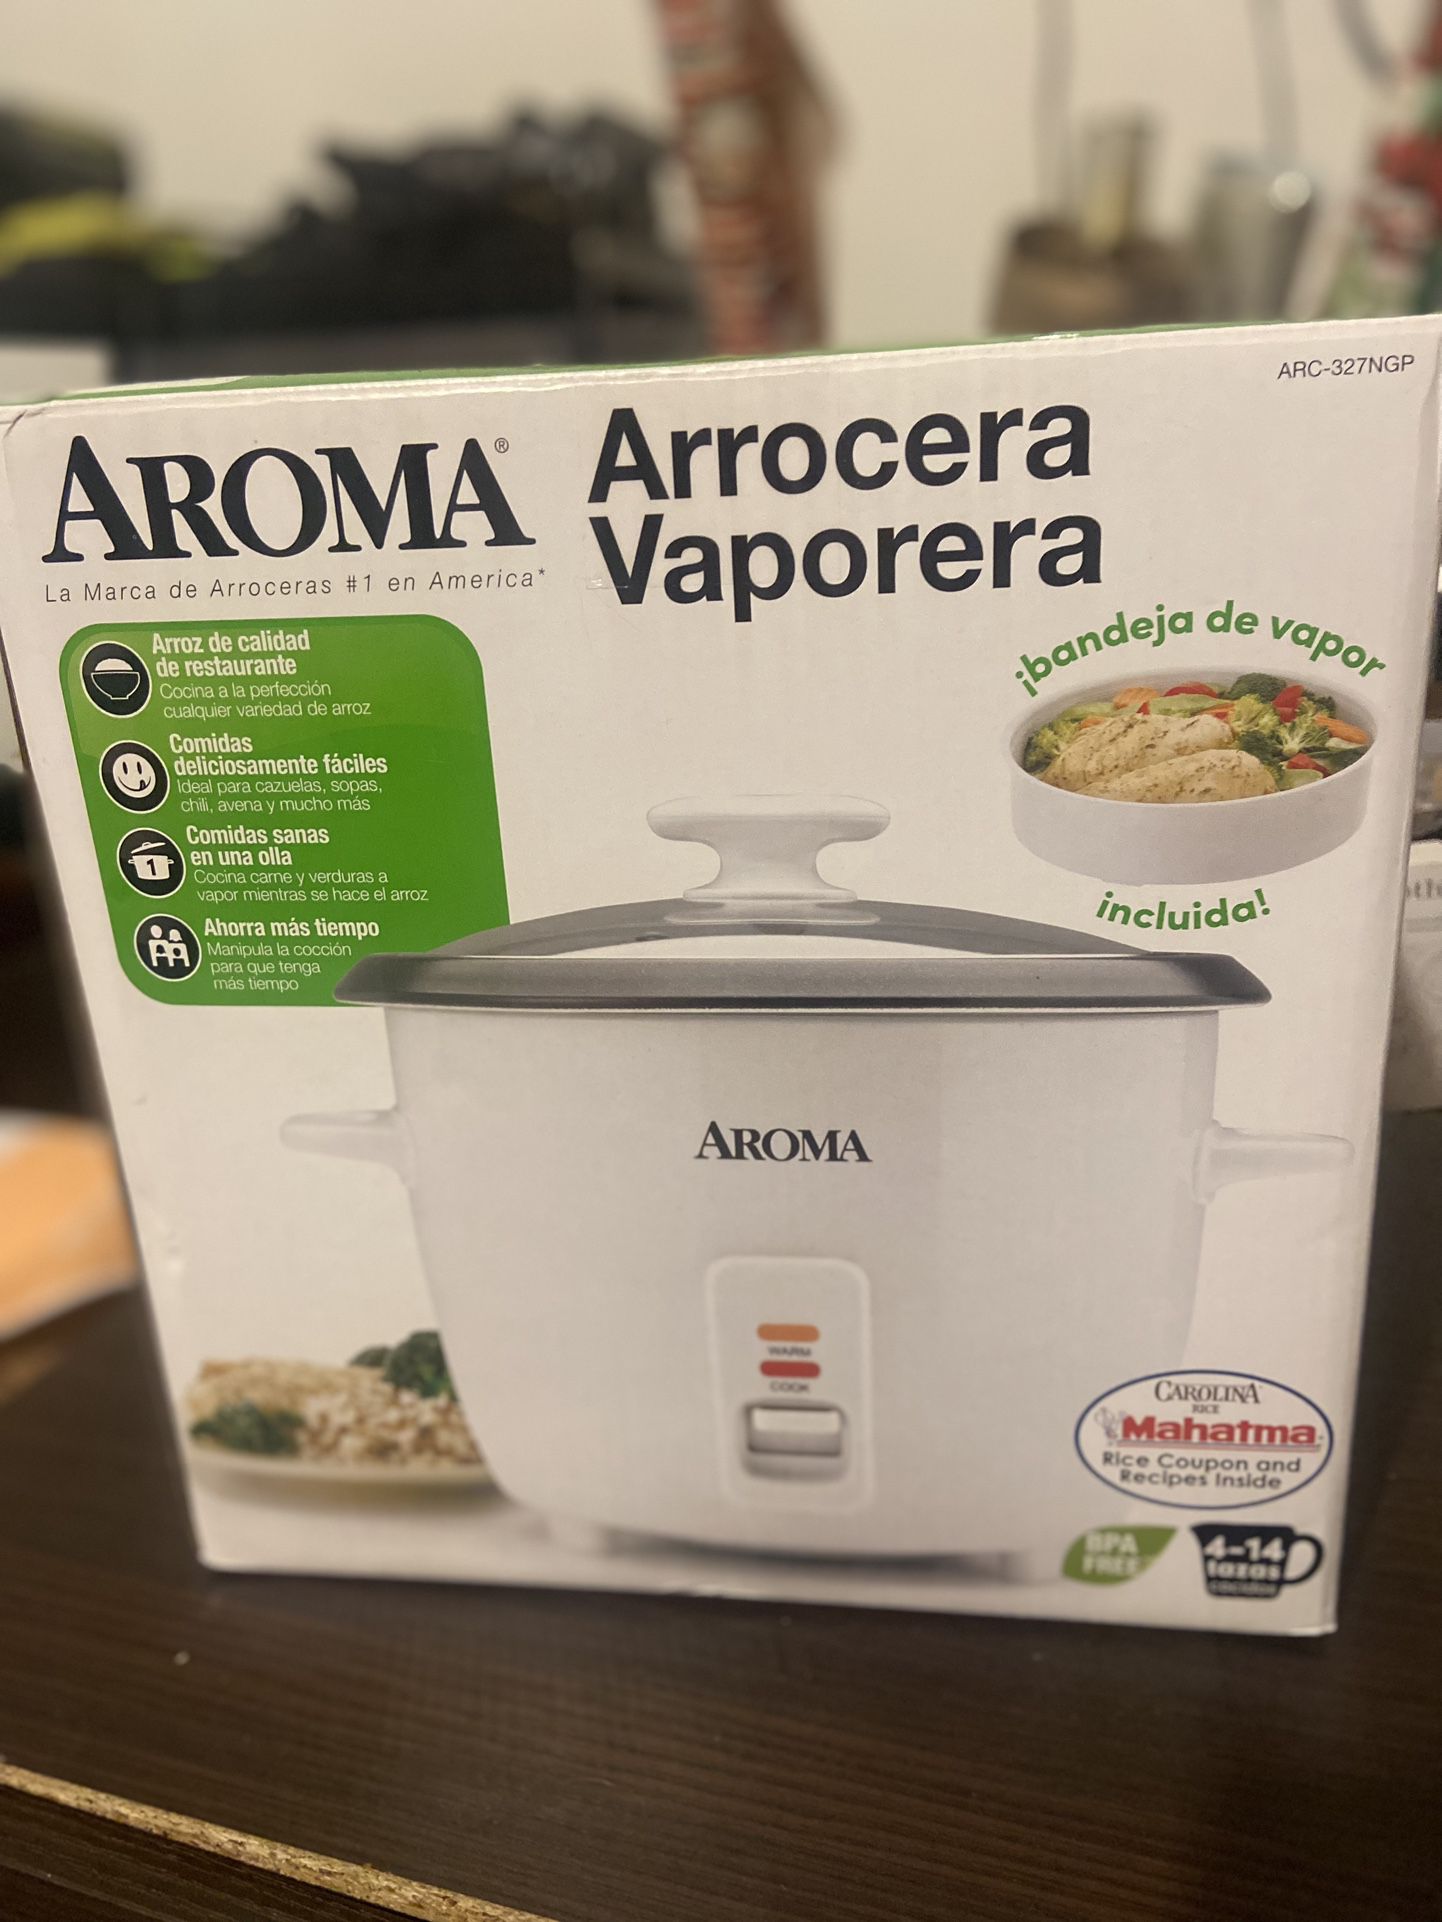 Aroma 14-Cup Rice Cooker & Food Steamer